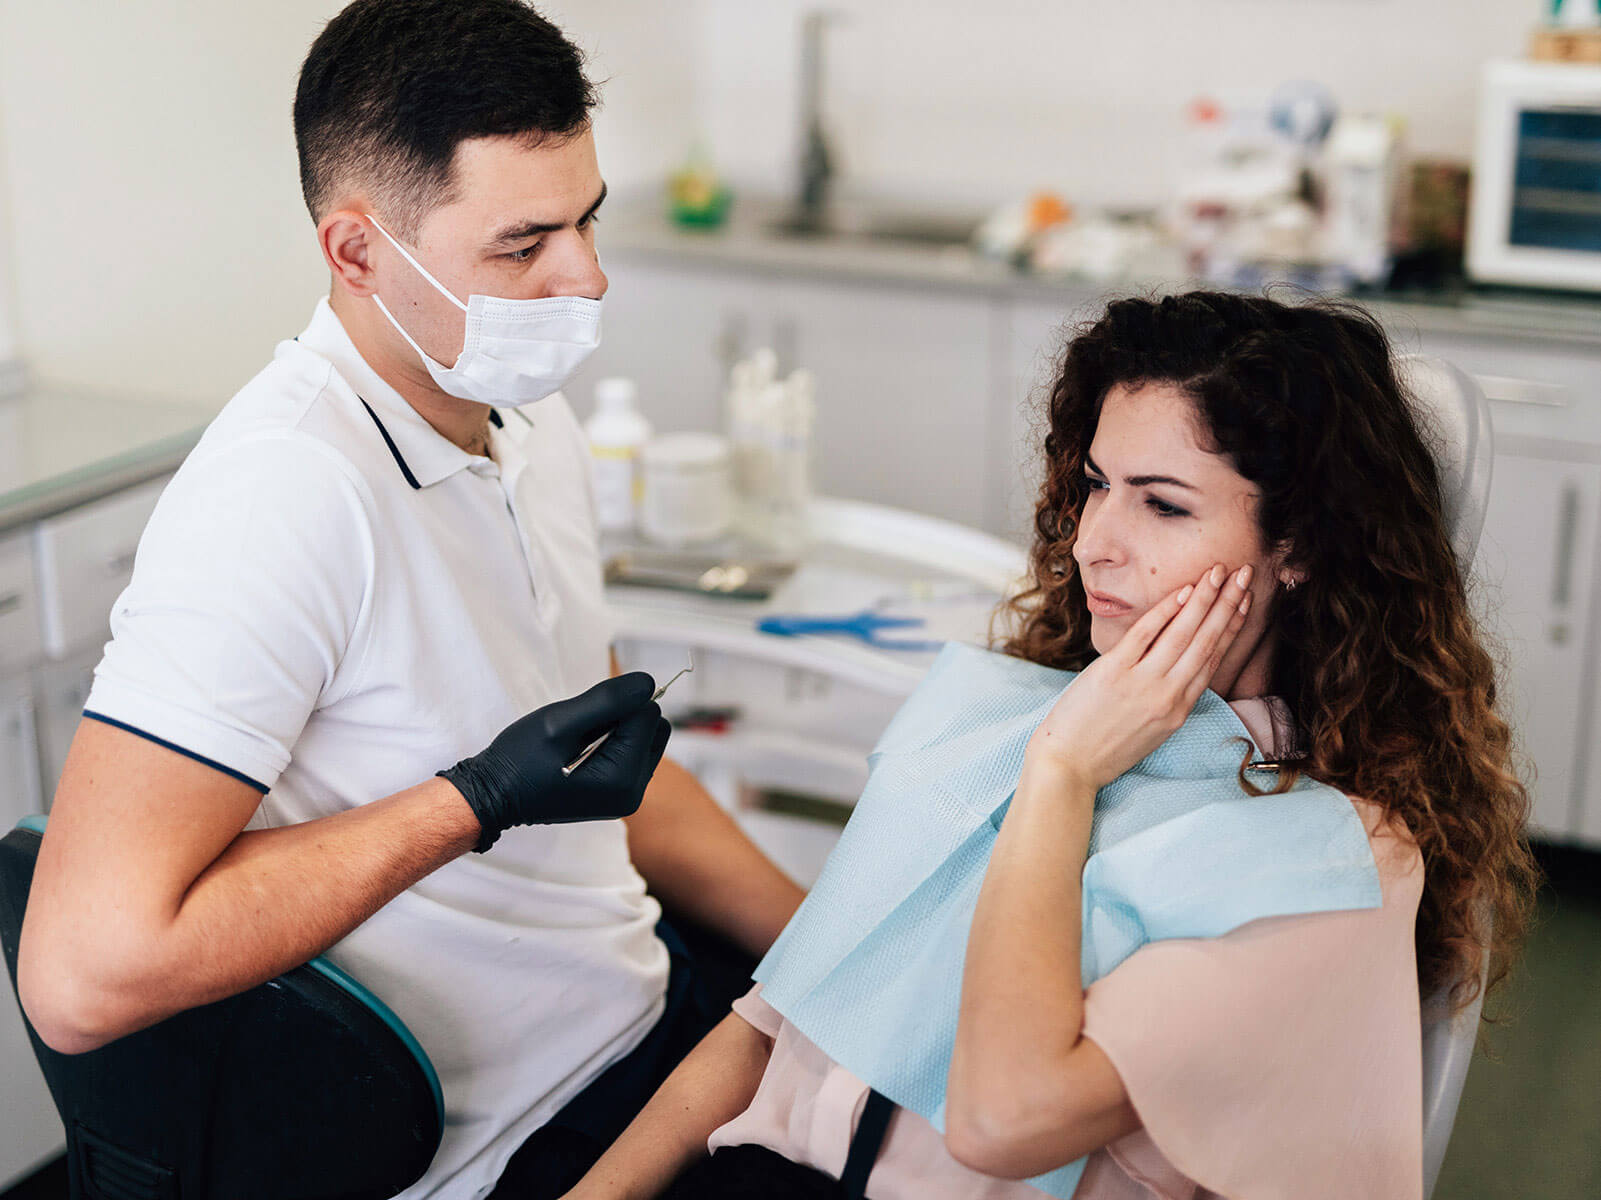 Can A Root Canal Treatment Reverse Tooth Decay?